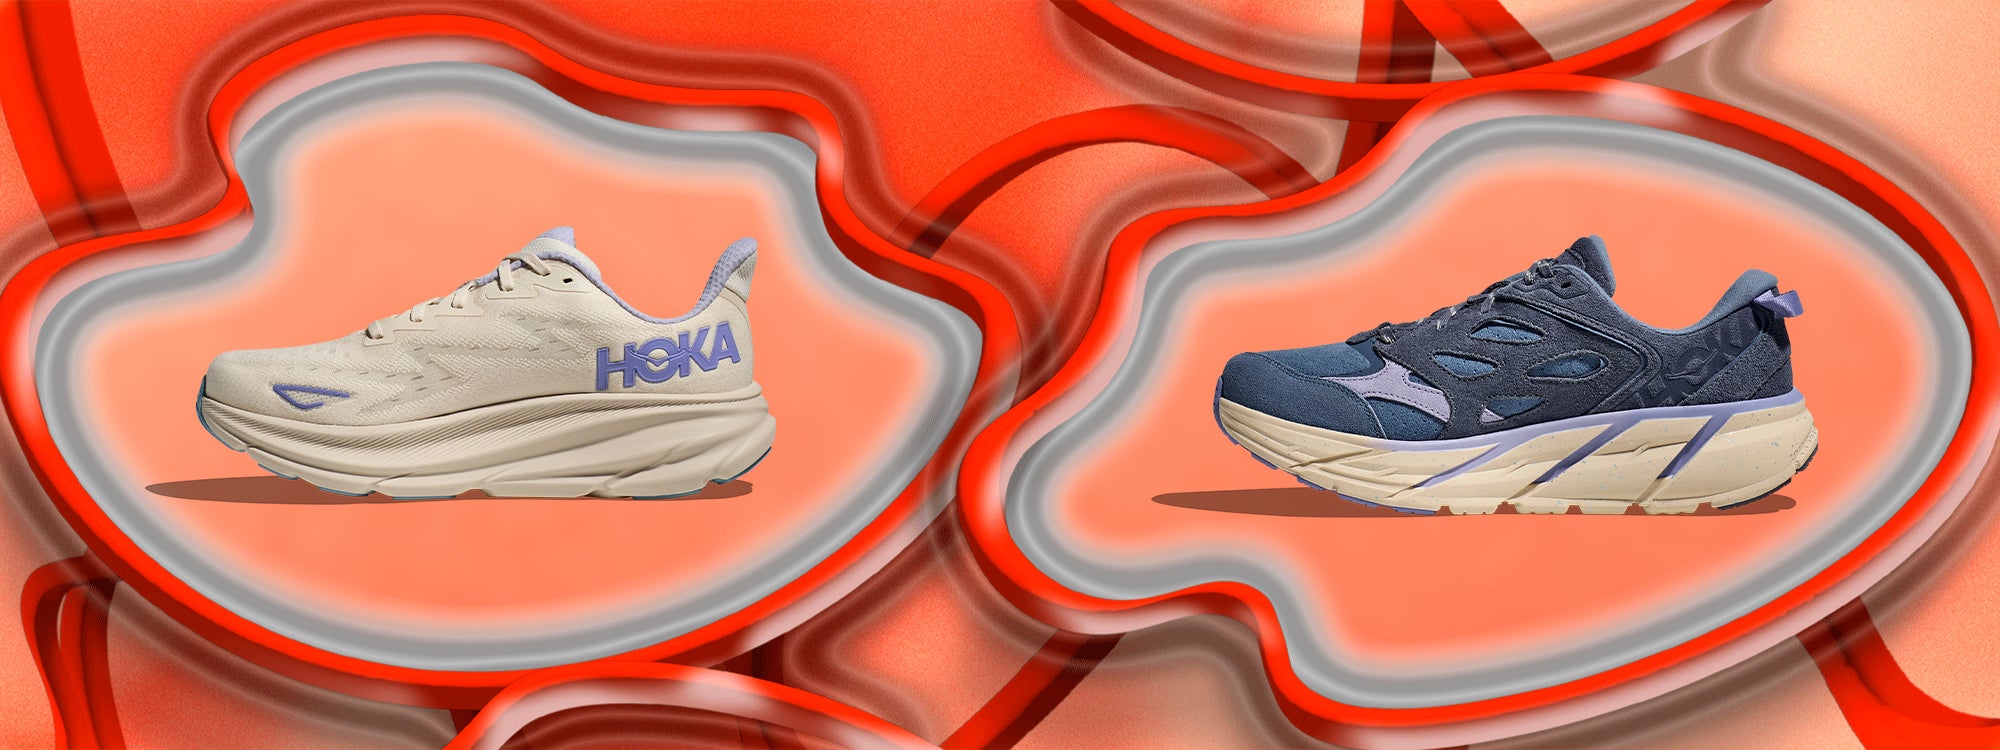 Hoka x FP Movement Collab Features Fashion-Forward Sneakers For Spring